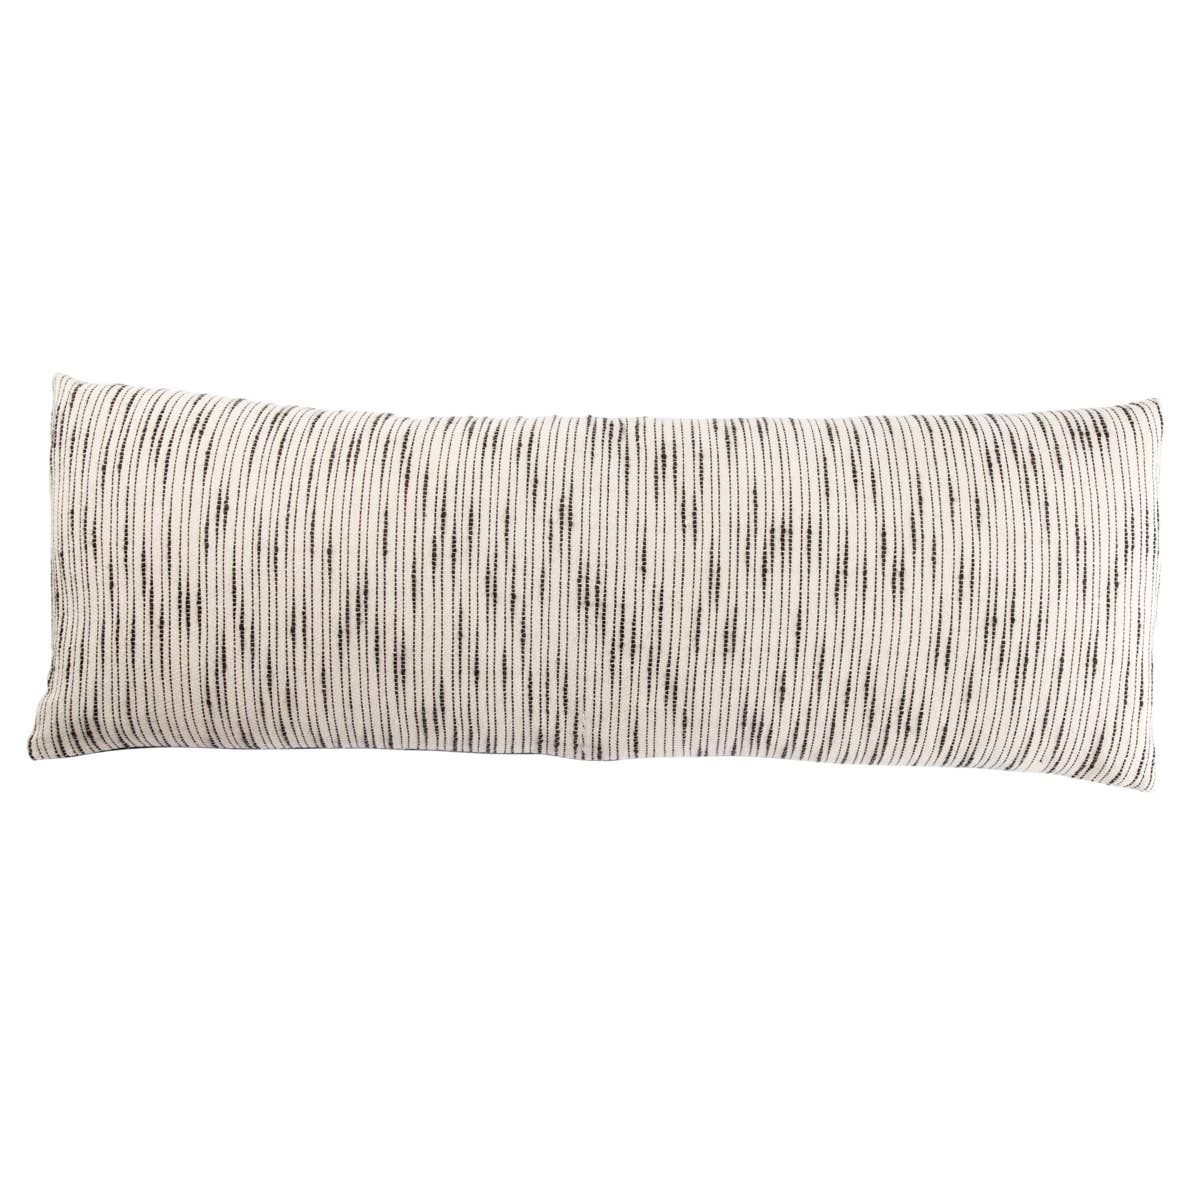 Shop Oversize Lumbar Pillow (14 X 40), Down from Peggy Haddad Interiors Home on Openhaus